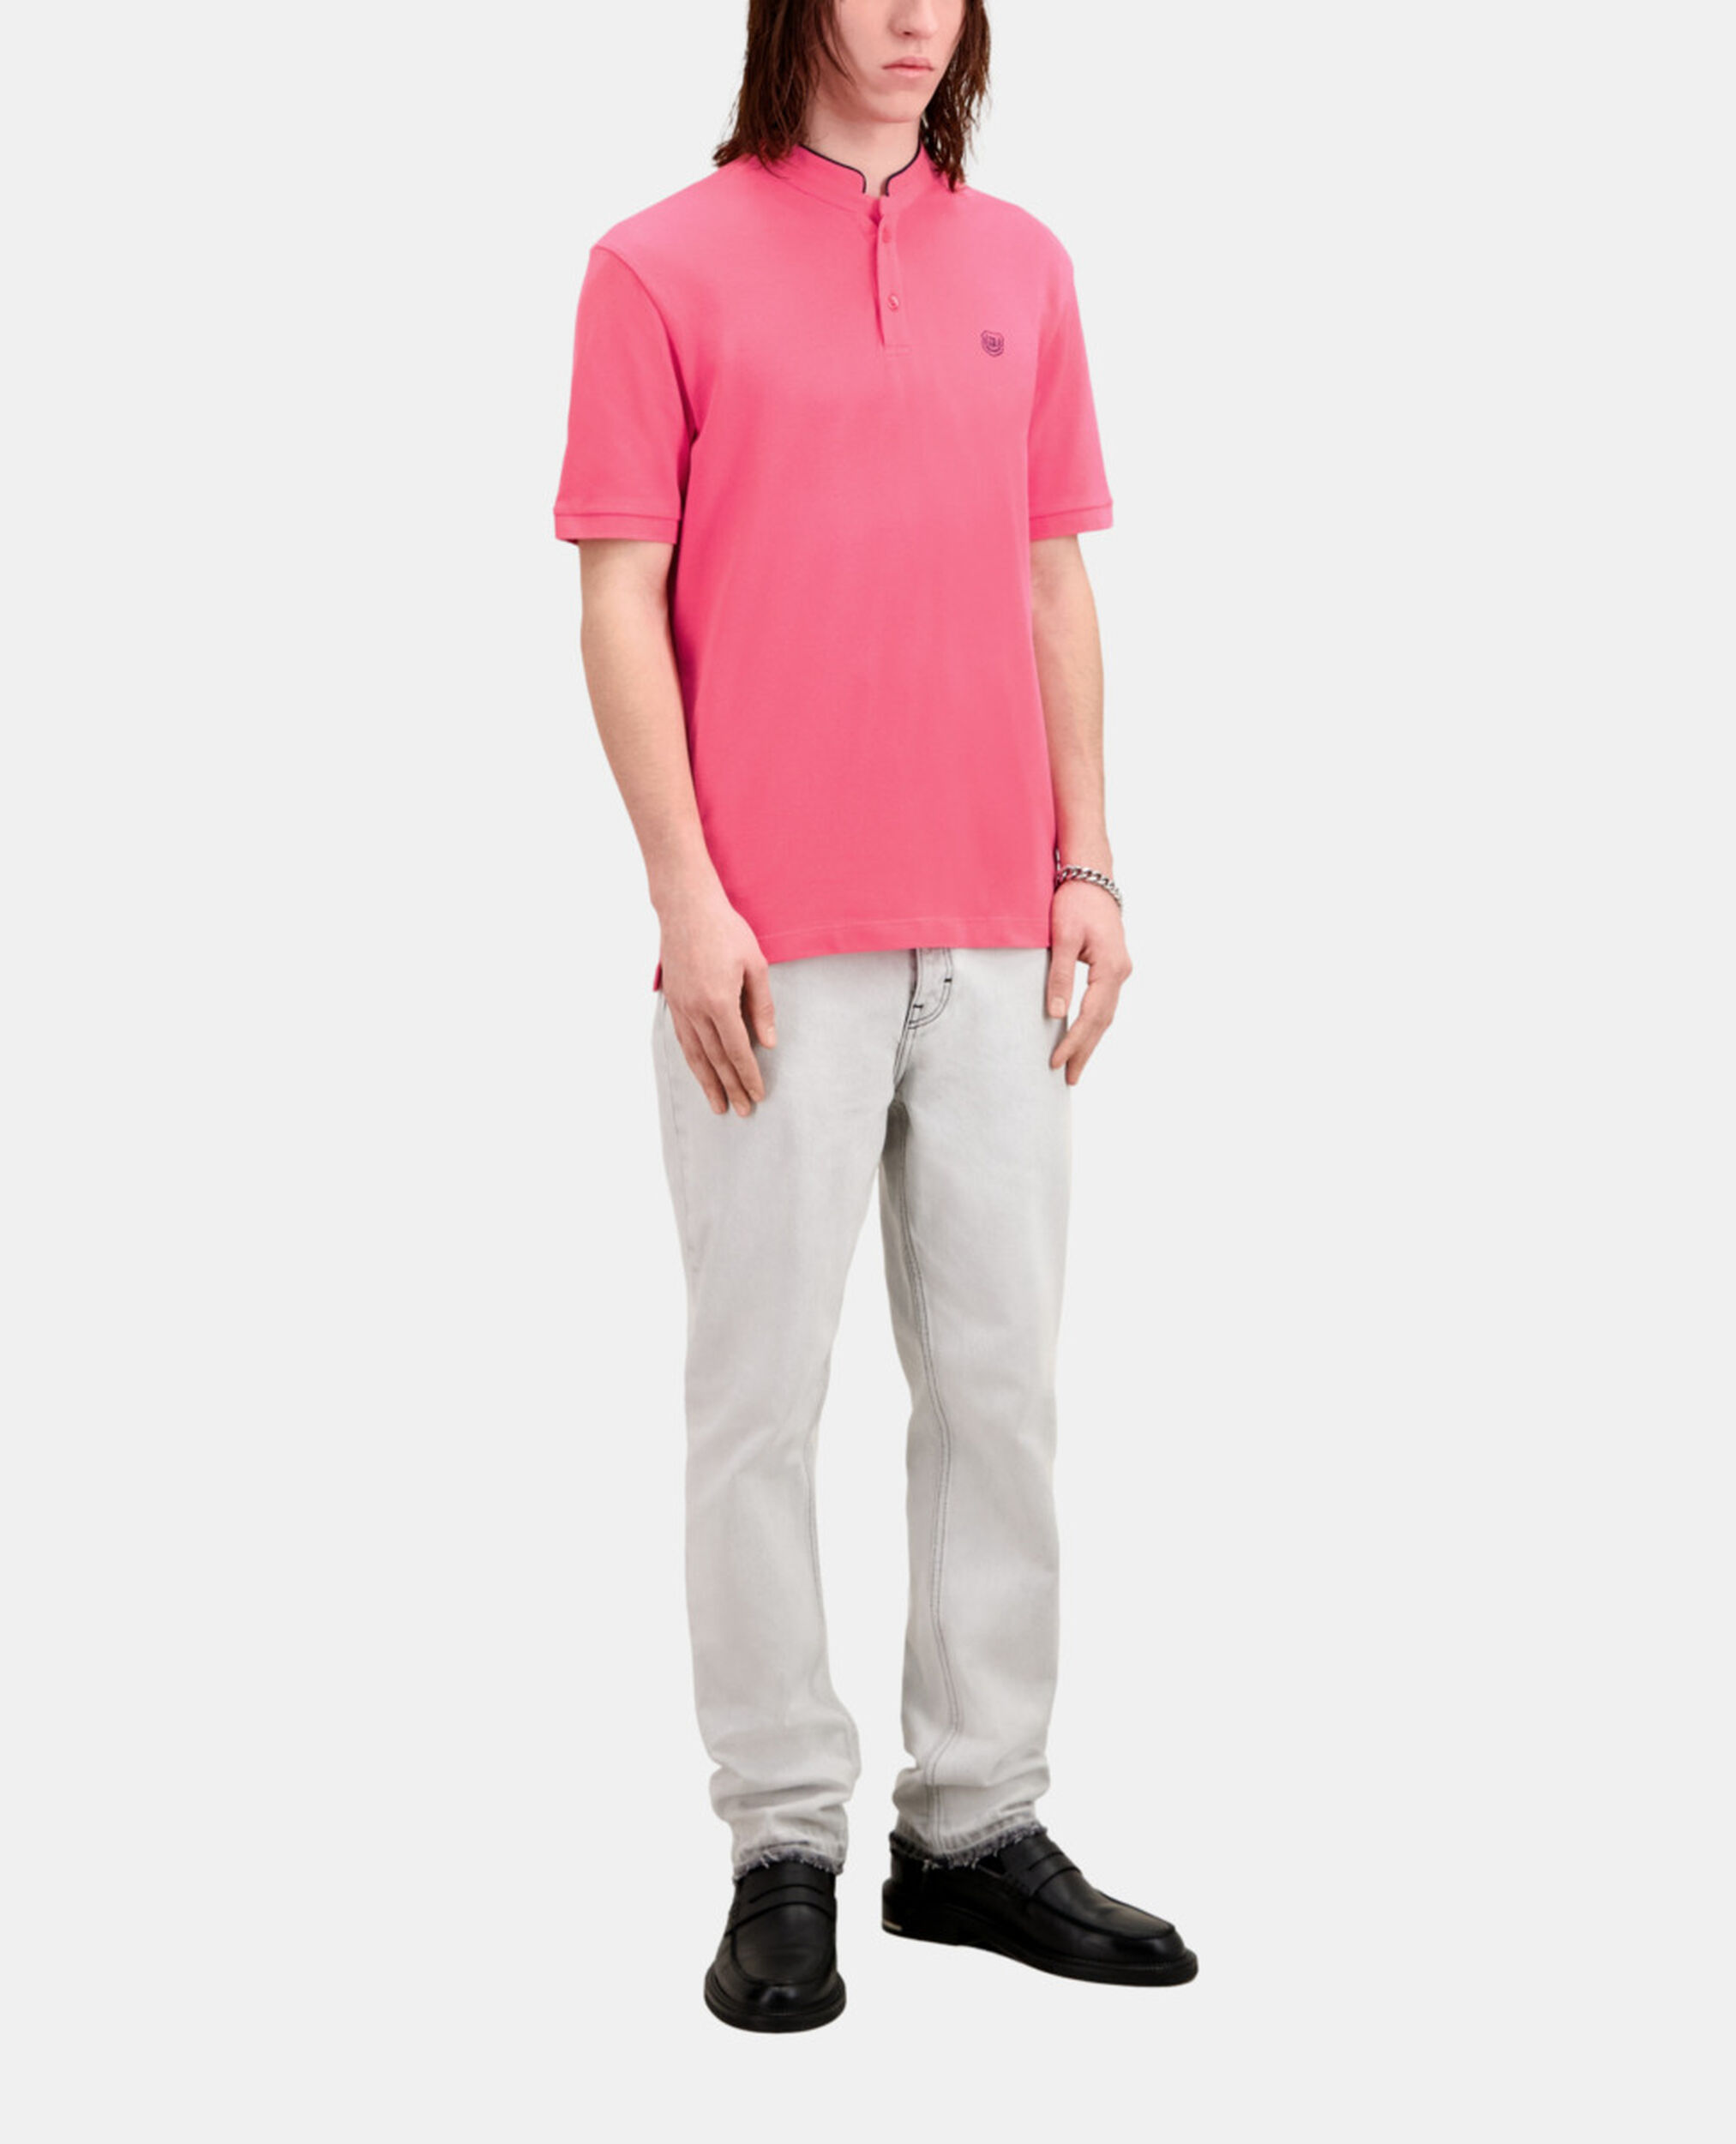 Rosa Poloshirt aus Baumwolle, OLD PINK, hi-res image number null